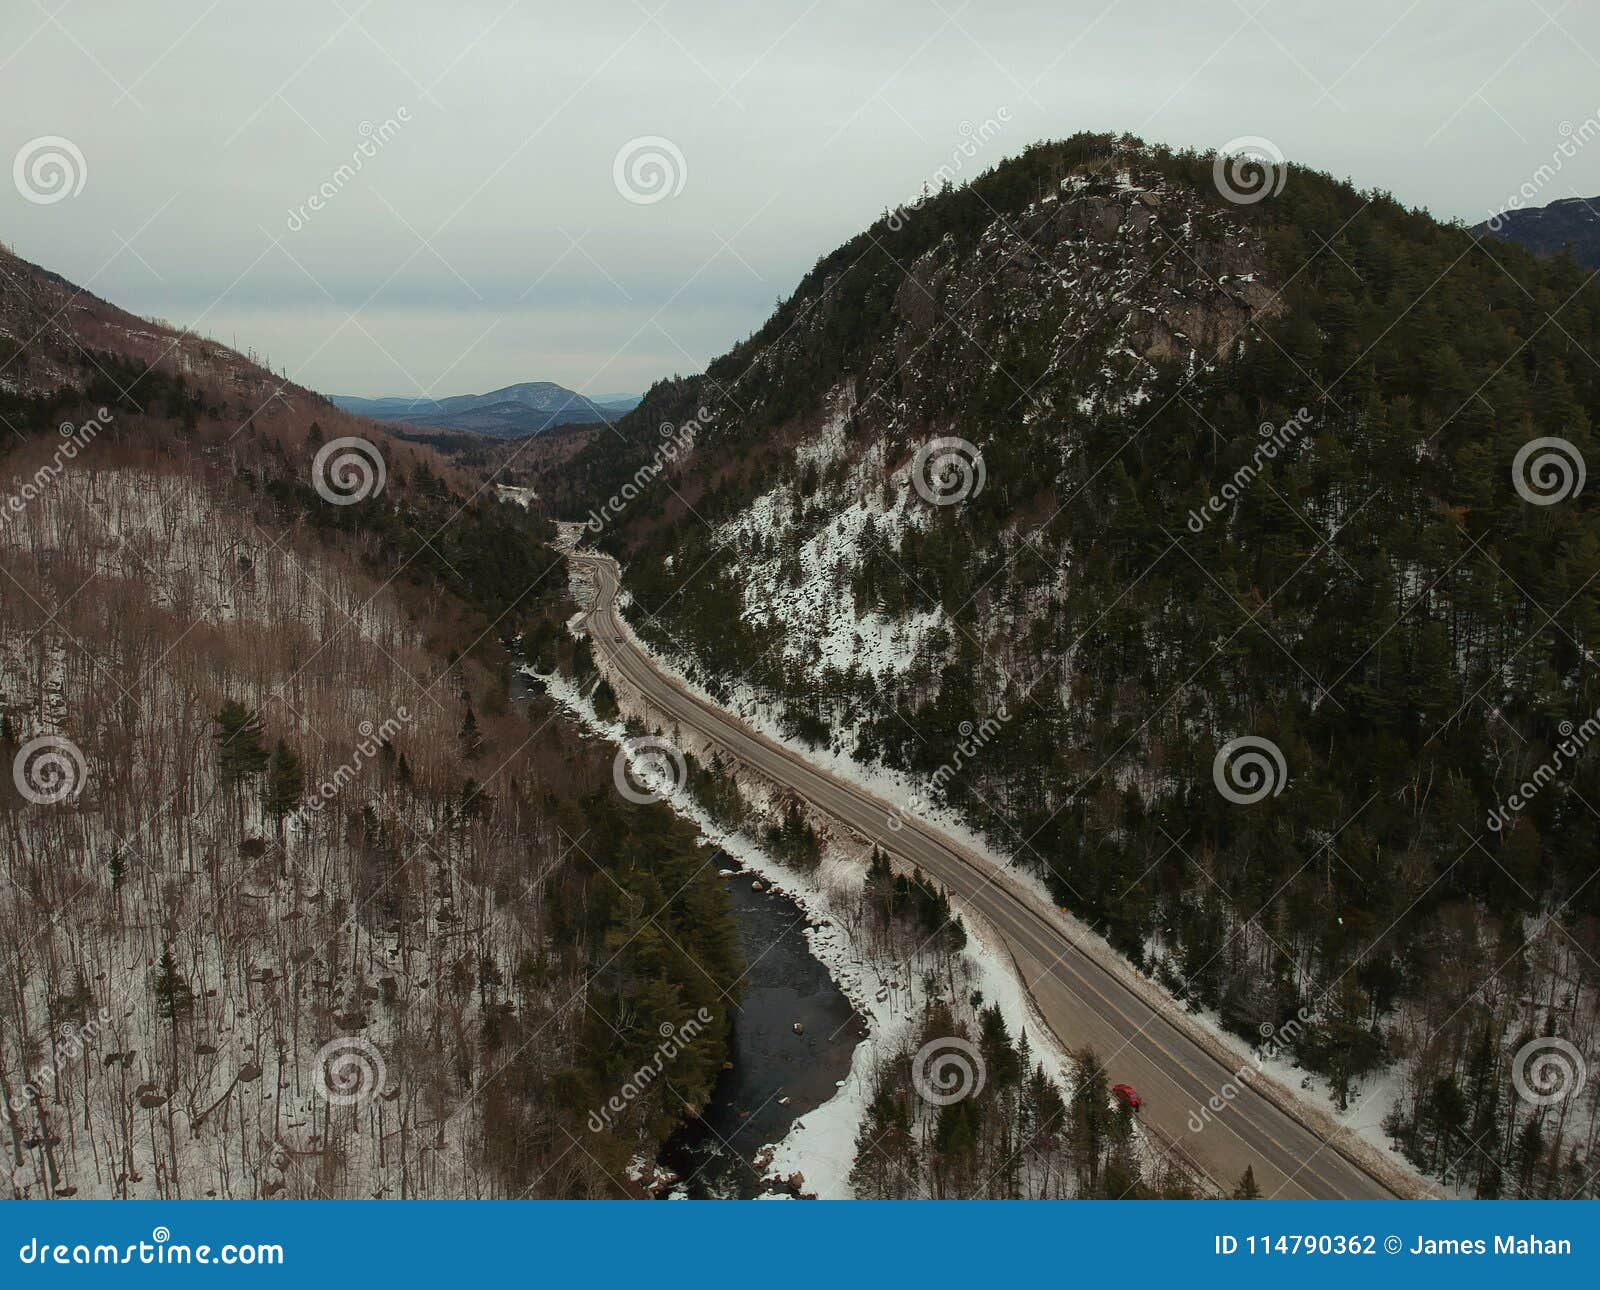 aerial drone shot of wilmington notch in the adirondacks.